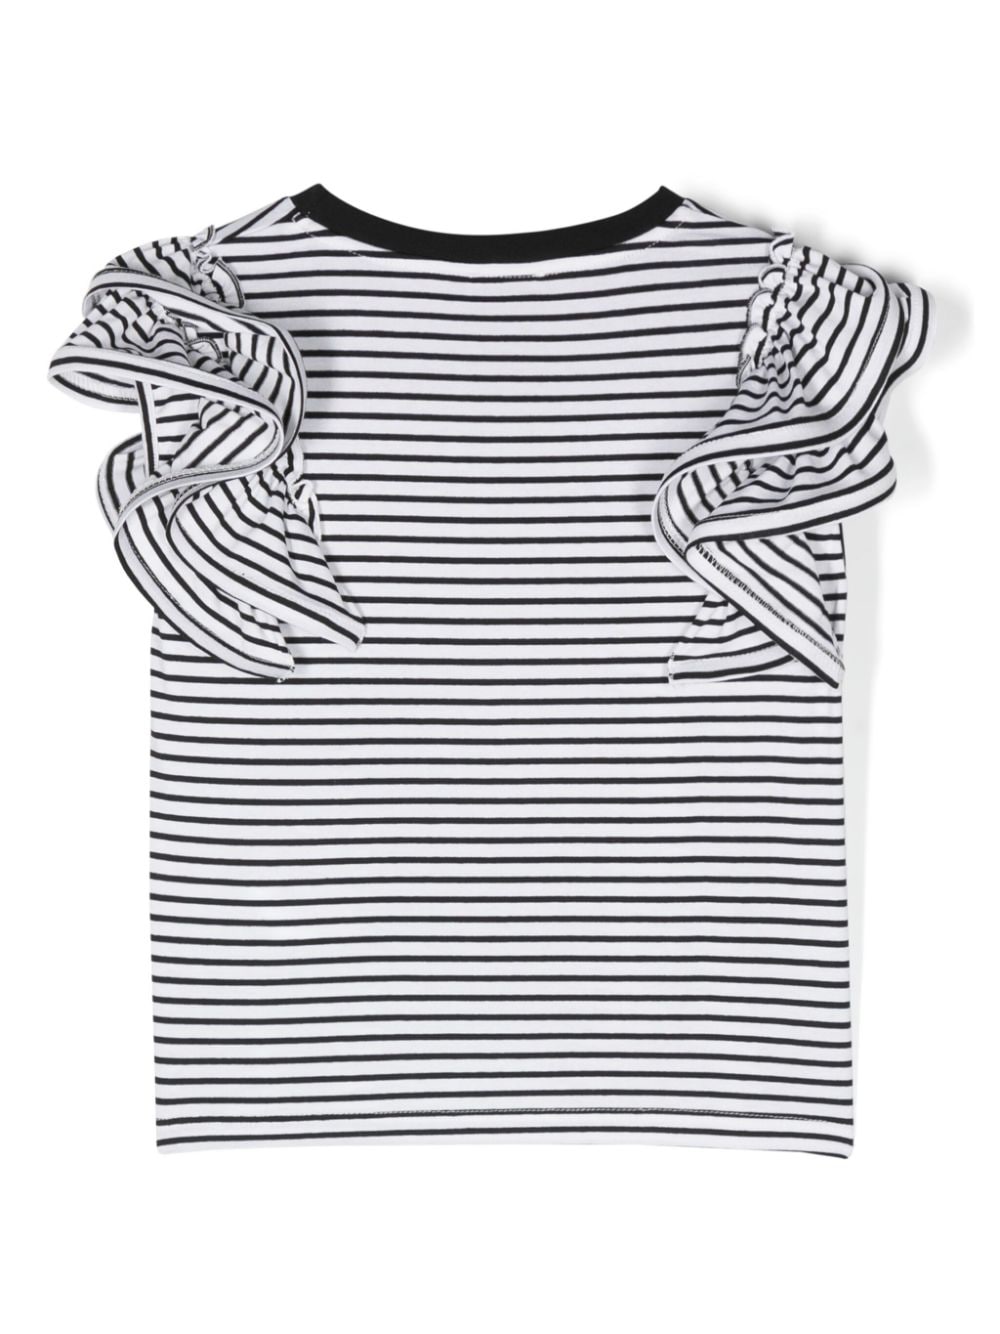 Miss Grant Kids T-shirt met ruches - Wit